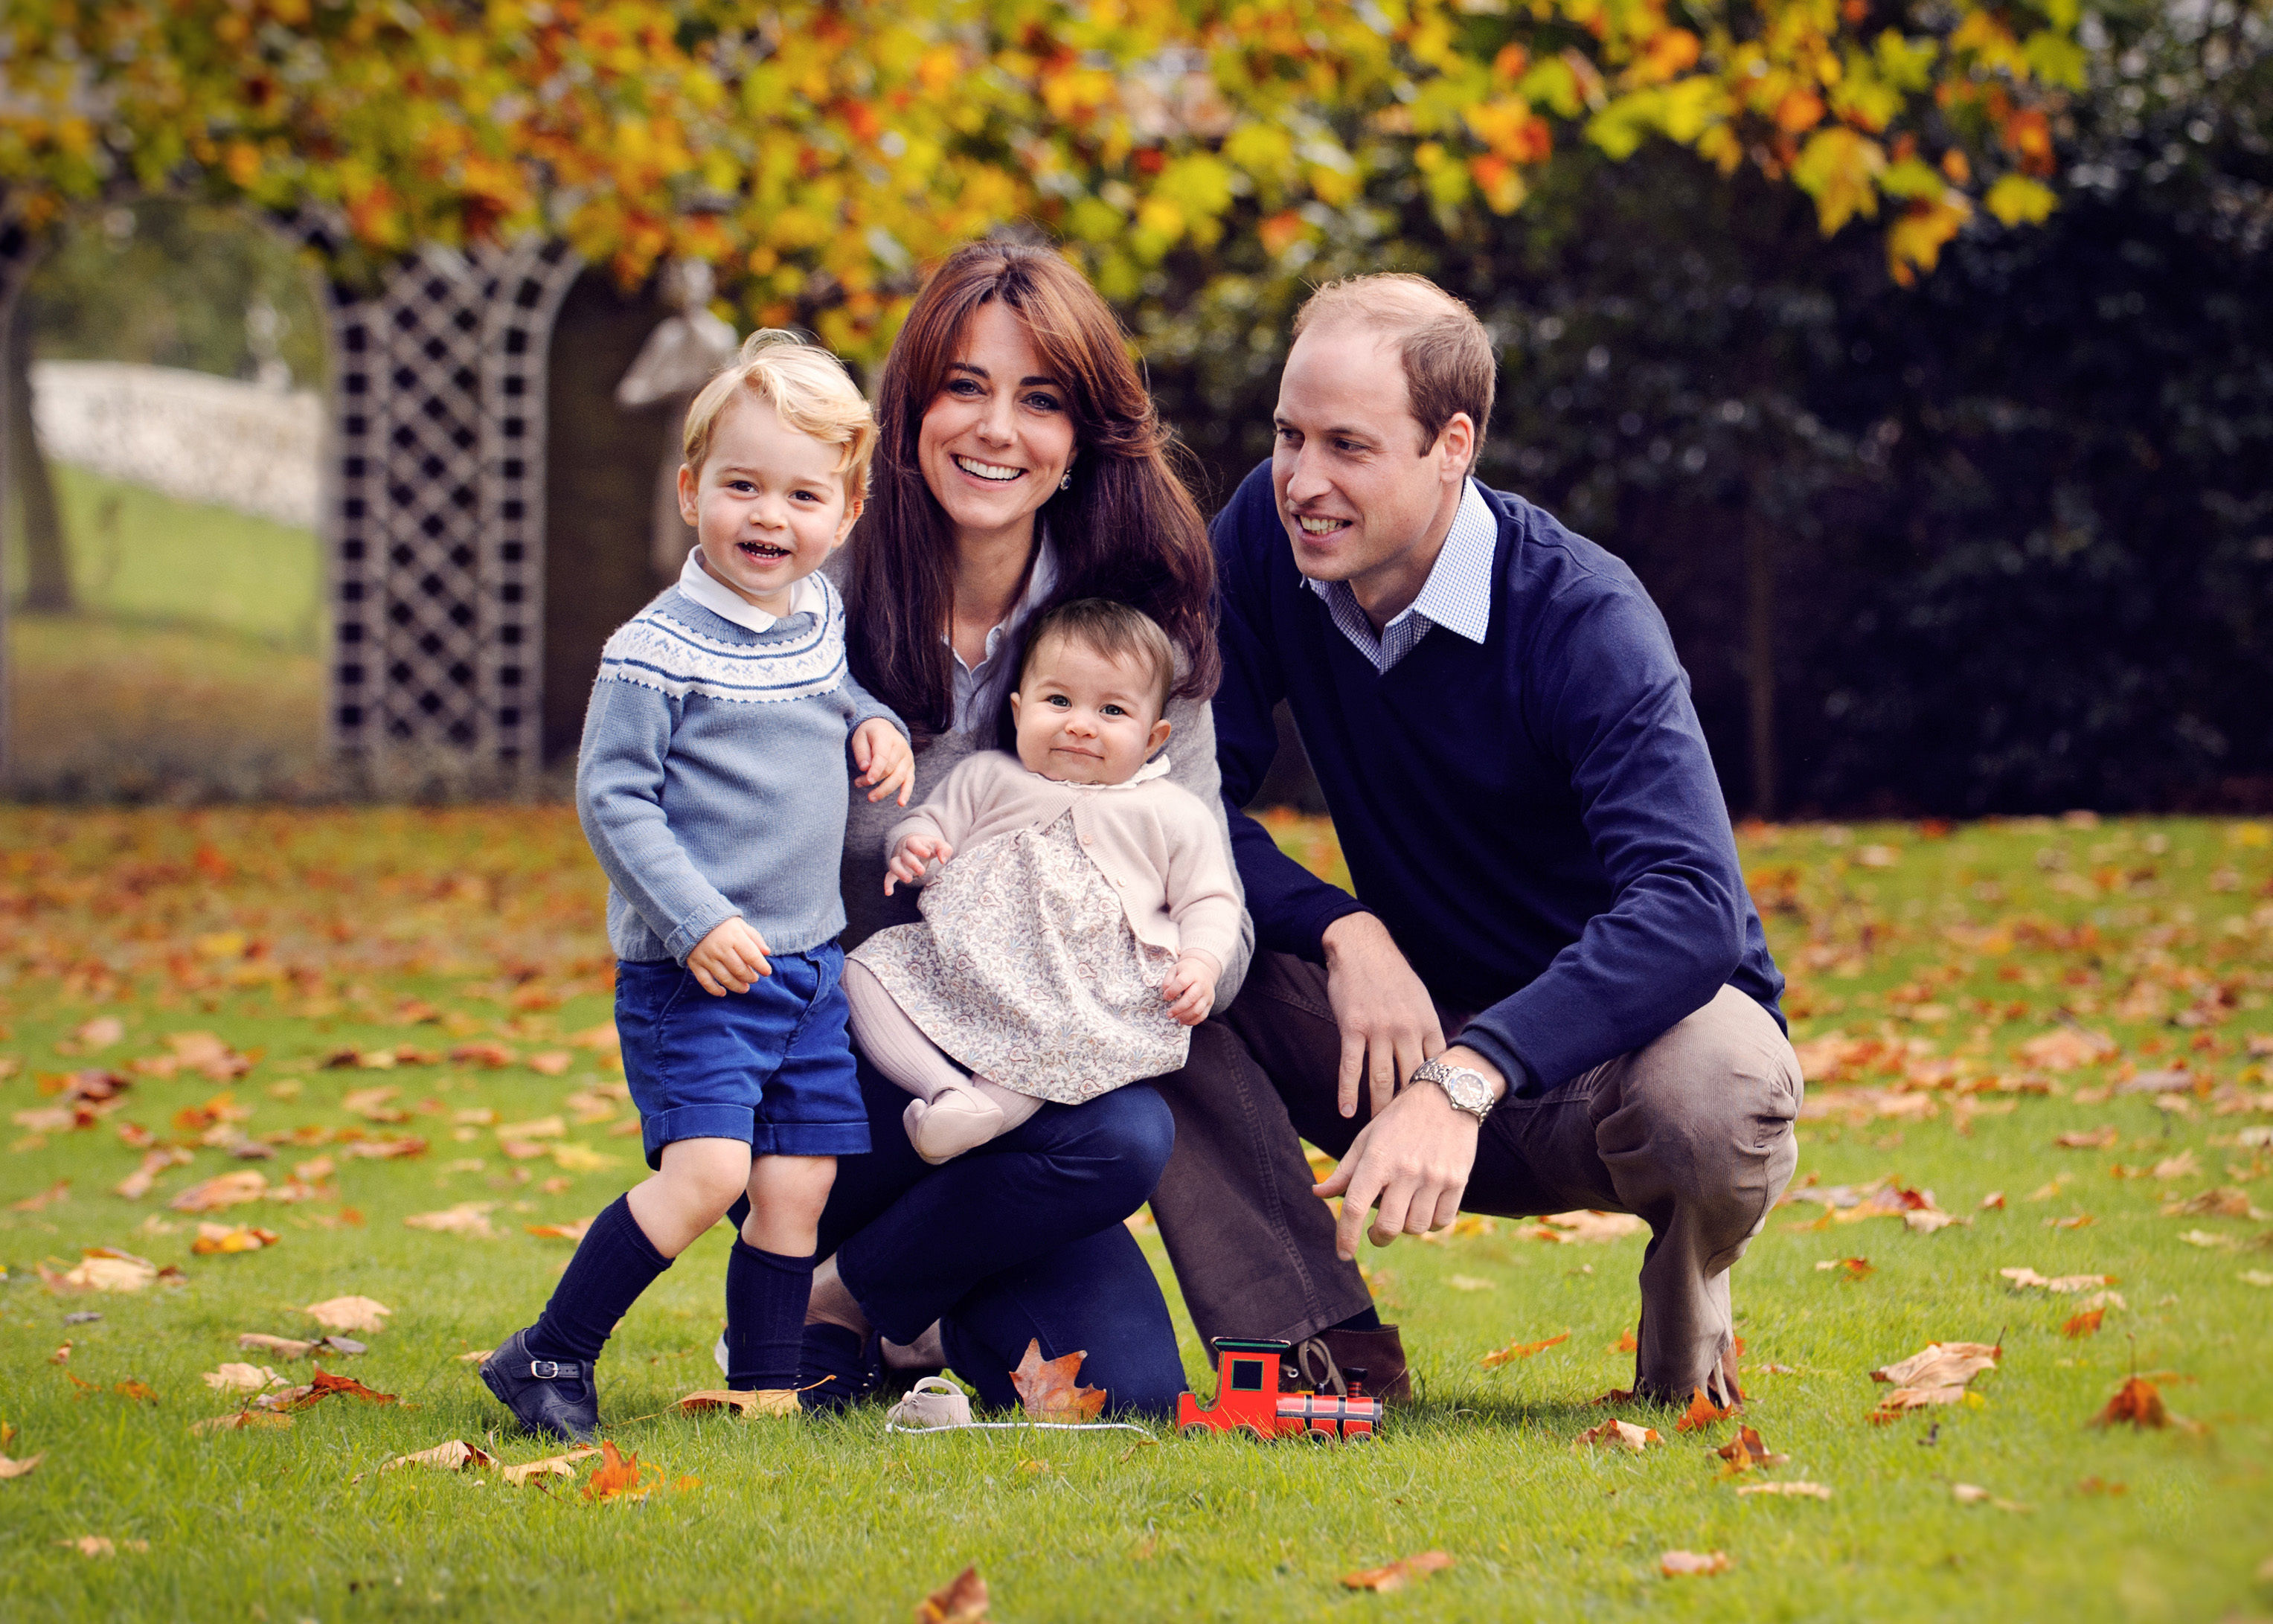 In this October handout image provided by Kensington Palace on Dec. 18, 2015, Prince William, Duke of Cambridge, and Catherine, Duchess of Cambridge, pose for a portrait with their children, Prince George and Princess Charlotte. (Chris Jelf—PA Wire/Press Association Images)